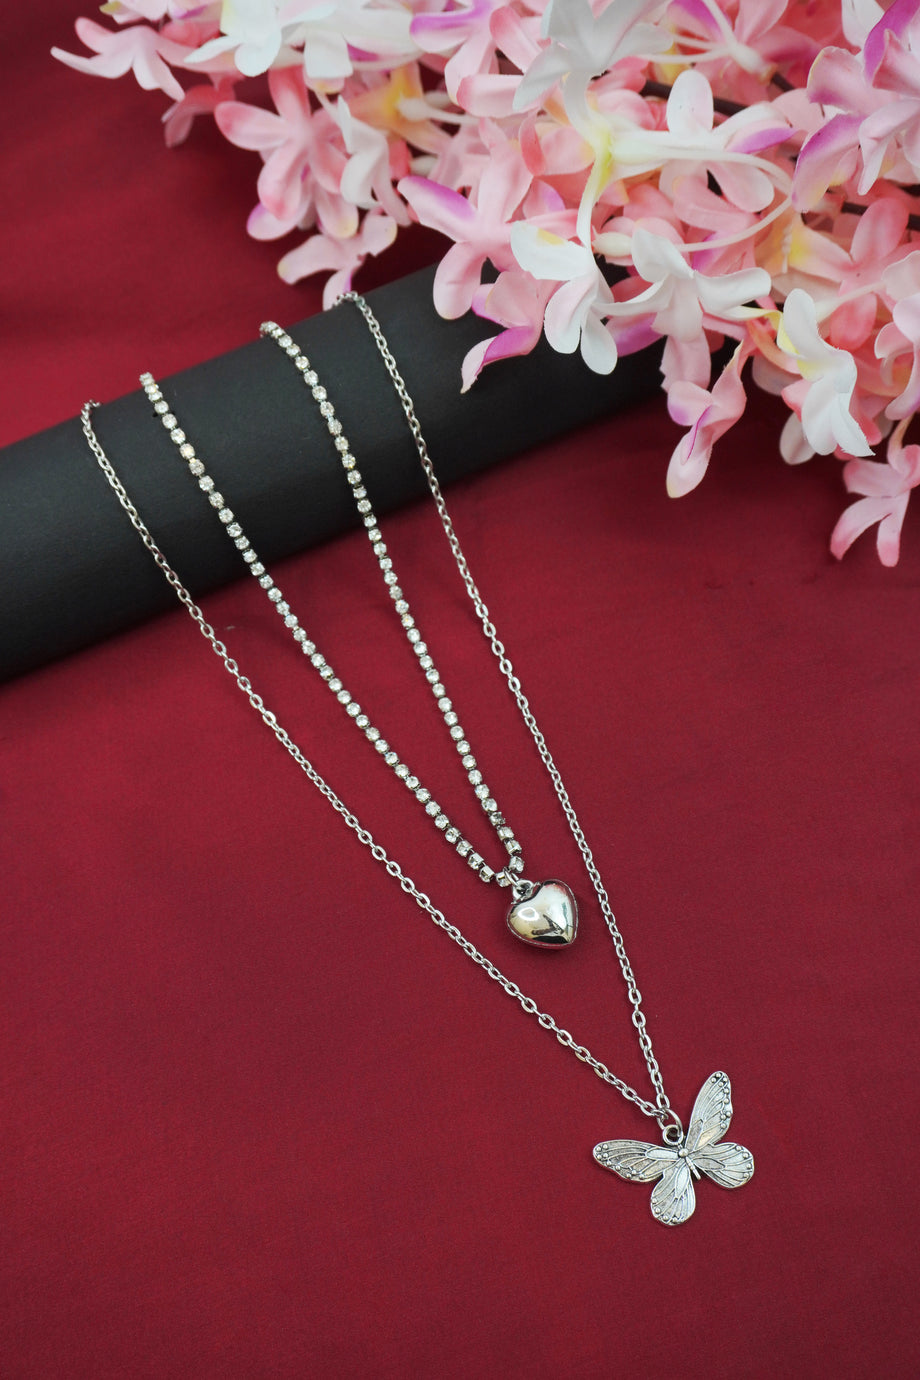 Butterfly Pendant Necklace For Women Girls 2021 Hot Sale Pretty Choker  Necklace For Beauty Jewelry Gift Wholesale Drop Shipping - Necklace -  AliExpress